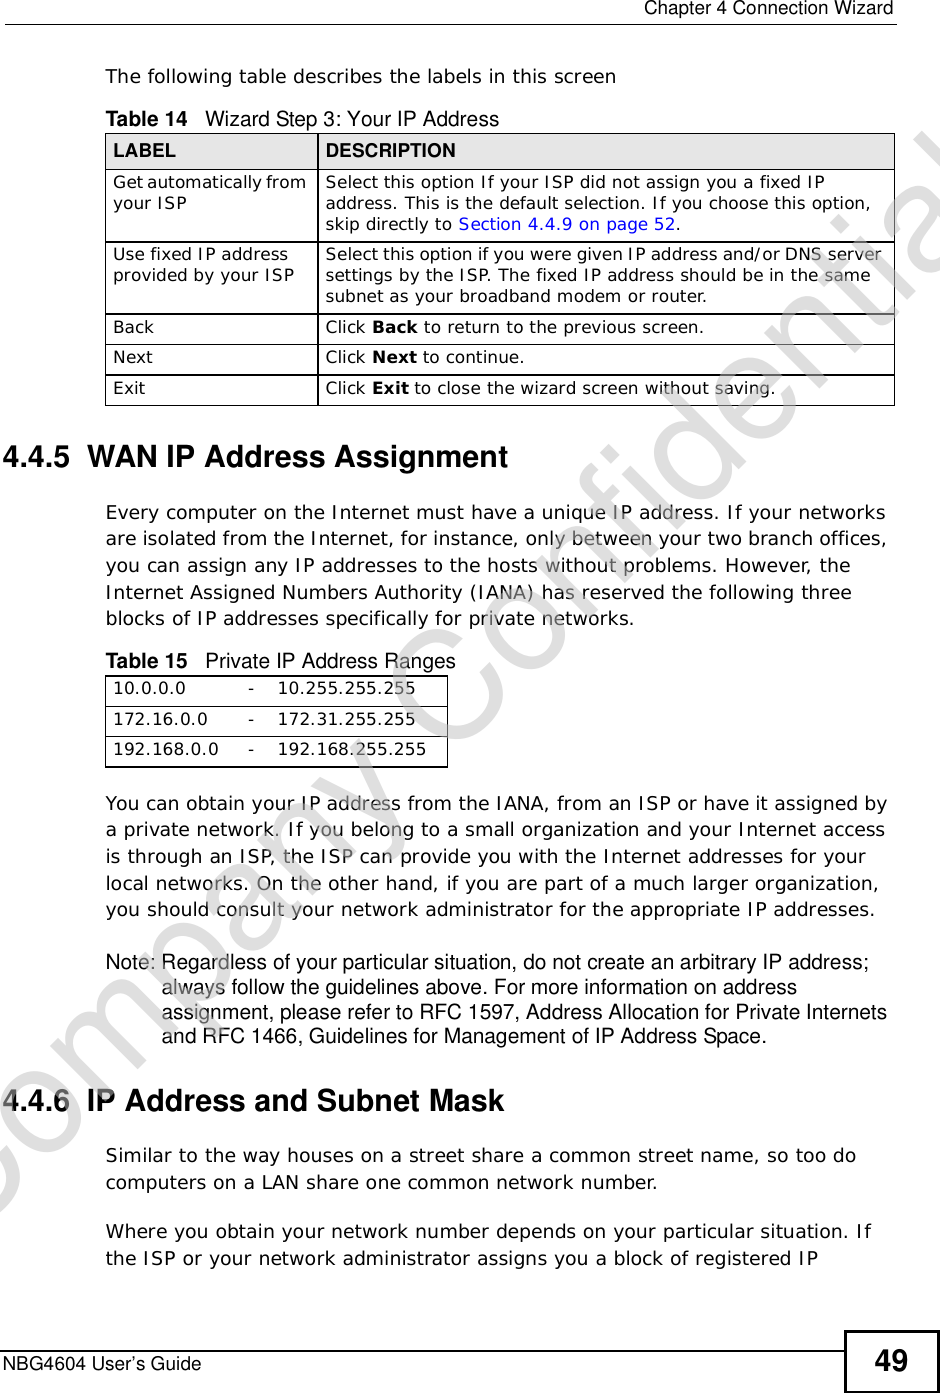  Chapter 4Connection WizardNBG4604 User’s Guide 49The following table describes the labels in this screen4.4.5  WAN IP Address AssignmentEvery computer on the Internet must have a unique IP address. If your networks are isolated from the Internet, for instance, only between your two branch offices, you can assign any IP addresses to the hosts without problems. However, the Internet Assigned Numbers Authority (IANA) has reserved the following three blocks of IP addresses specifically for private networks.You can obtain your IP address from the IANA, from an ISP or have it assigned by a private network. If you belong to a small organization and your Internet access is through an ISP, the ISP can provide you with the Internet addresses for your local networks. On the other hand, if you are part of a much larger organization, you should consult your network administrator for the appropriate IP addresses.Note: Regardless of your particular situation, do not create an arbitrary IP address; always follow the guidelines above. For more information on address assignment, please refer to RFC 1597, Address Allocation for Private Internets and RFC 1466, Guidelines for Management of IP Address Space.4.4.6  IP Address and Subnet MaskSimilar to the way houses on a street share a common street name, so too do computers on a LAN share one common network number.Where you obtain your network number depends on your particular situation. If the ISP or your network administrator assigns you a block of registered IP Table 14   Wizard Step 3: Your IP AddressLABEL DESCRIPTIONGet automatically from your ISP  Select this option If your ISP did not assign you a fixed IP address. This is the default selection. If you choose this option, skip directly to Section 4.4.9 on page 52.Use fixed IP address provided by your ISP Select this option if you were given IP address and/or DNS server settings by the ISP. The fixed IP address should be in the same subnet as your broadband modem or router. Back Click Back to return to the previous screen.Next Click Next to continue. Exit Click Exit to close the wizard screen without saving.Table 15   Private IP Address Ranges10.0.0.0 - 10.255.255.255172.16.0.0 - 172.31.255.255192.168.0.0 - 192.168.255.255Company Confidential